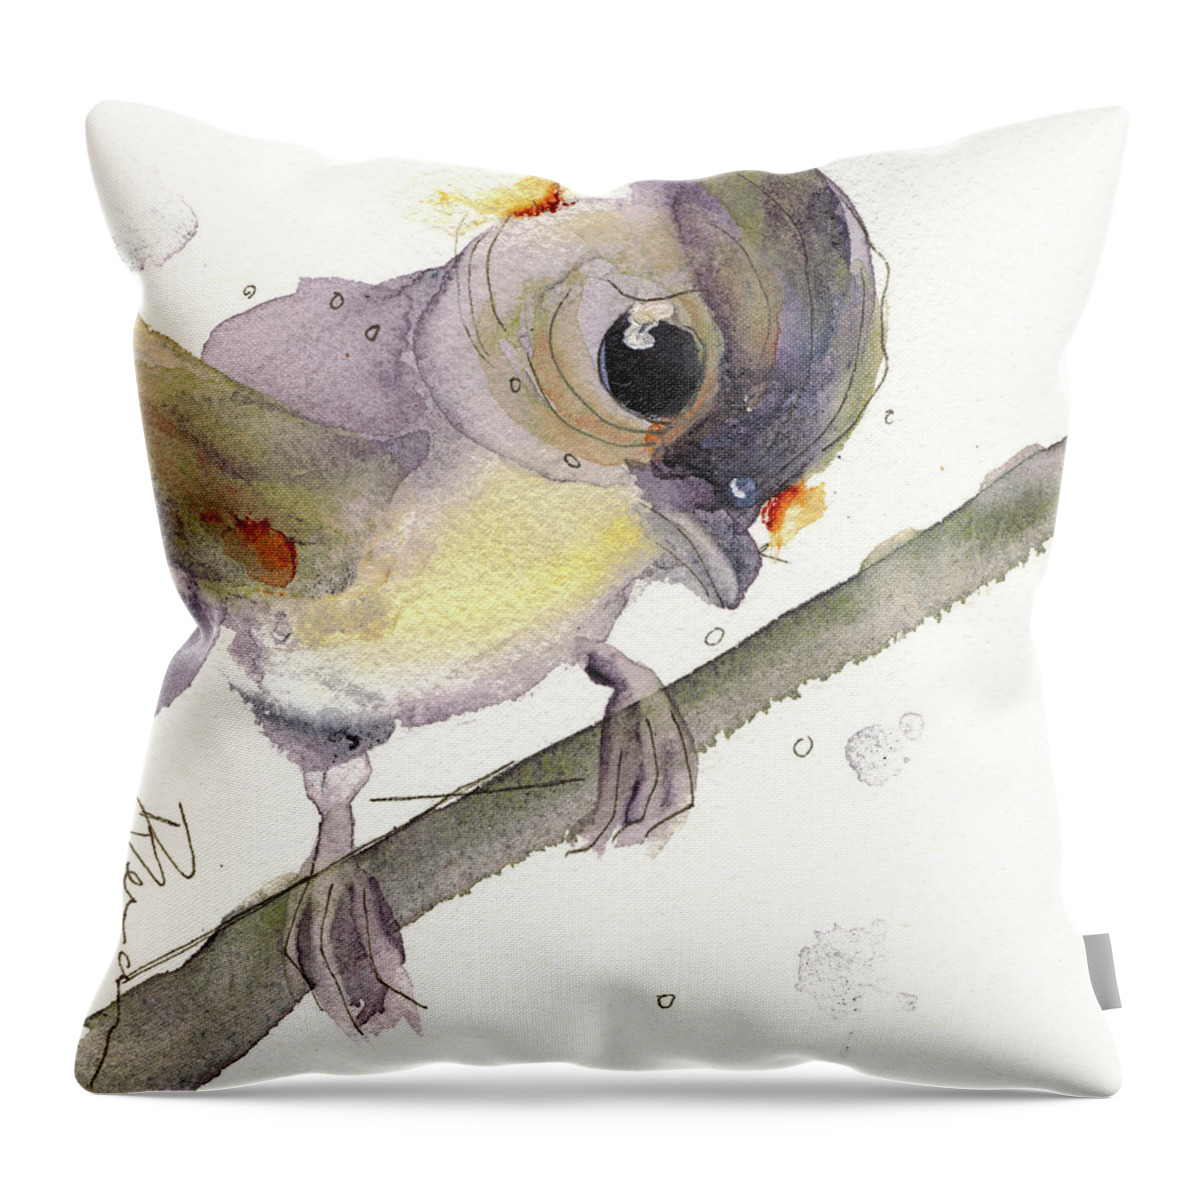 Tufted Titmouse Throw Pillow featuring the painting Tufted Titmouse by Dawn Derman